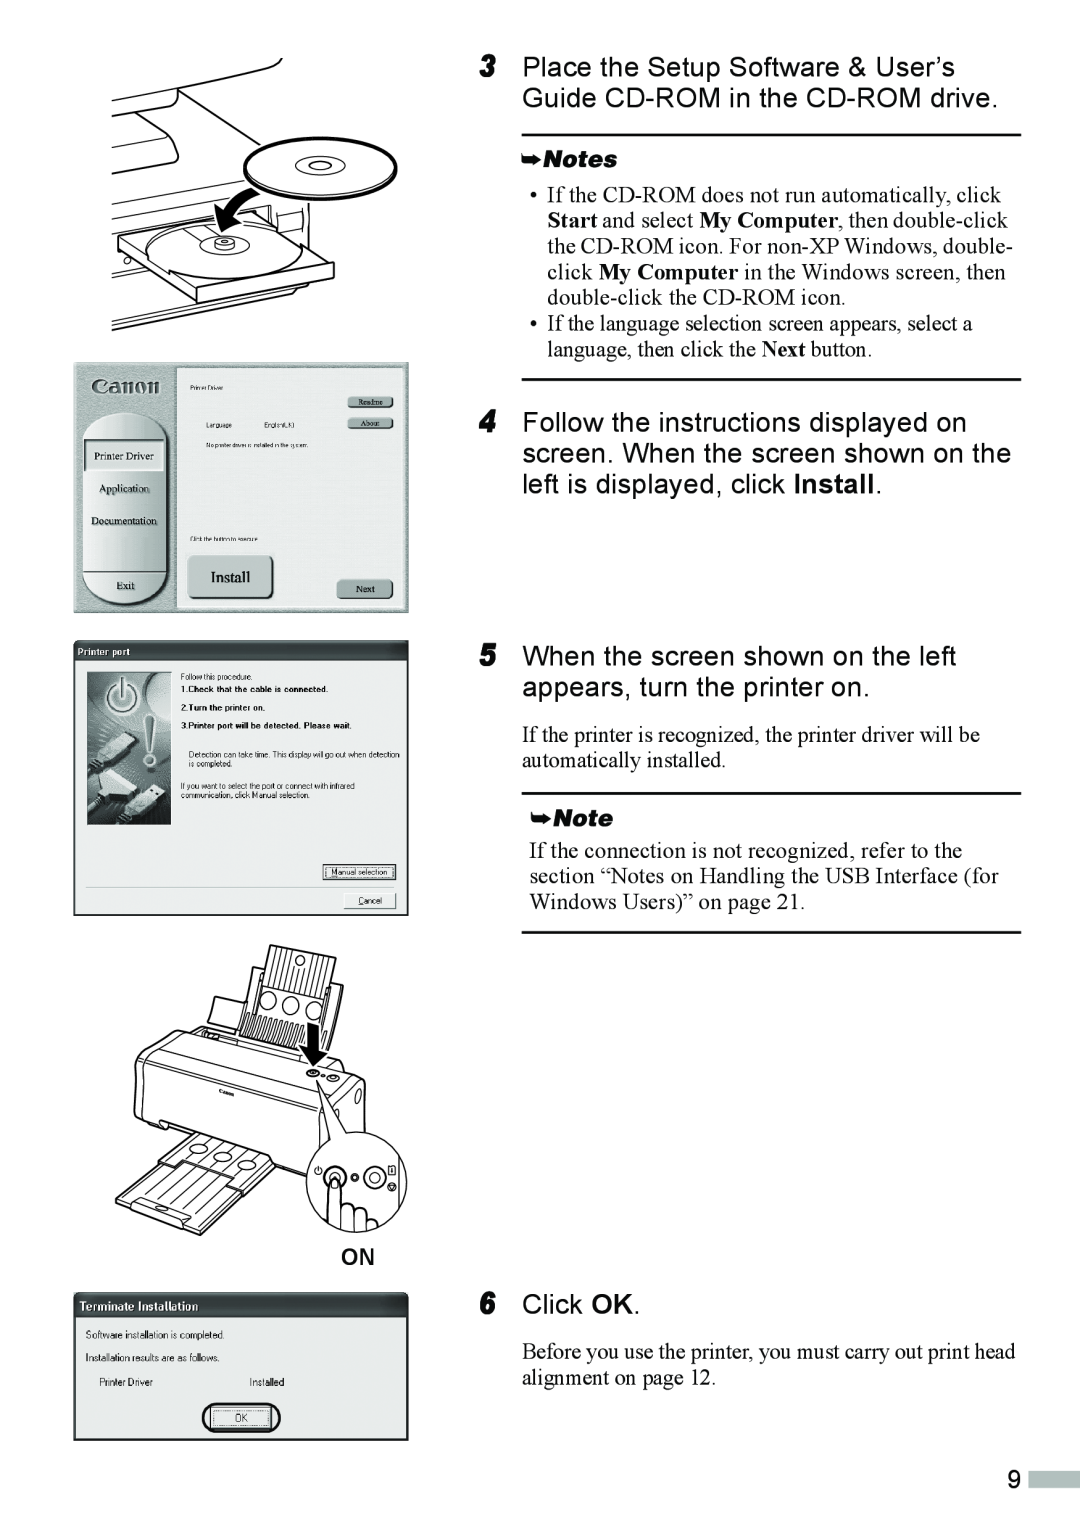 Canon 320 quick start Place the Setup Software & User’s Guide CD-ROM in the CD-ROM drive 